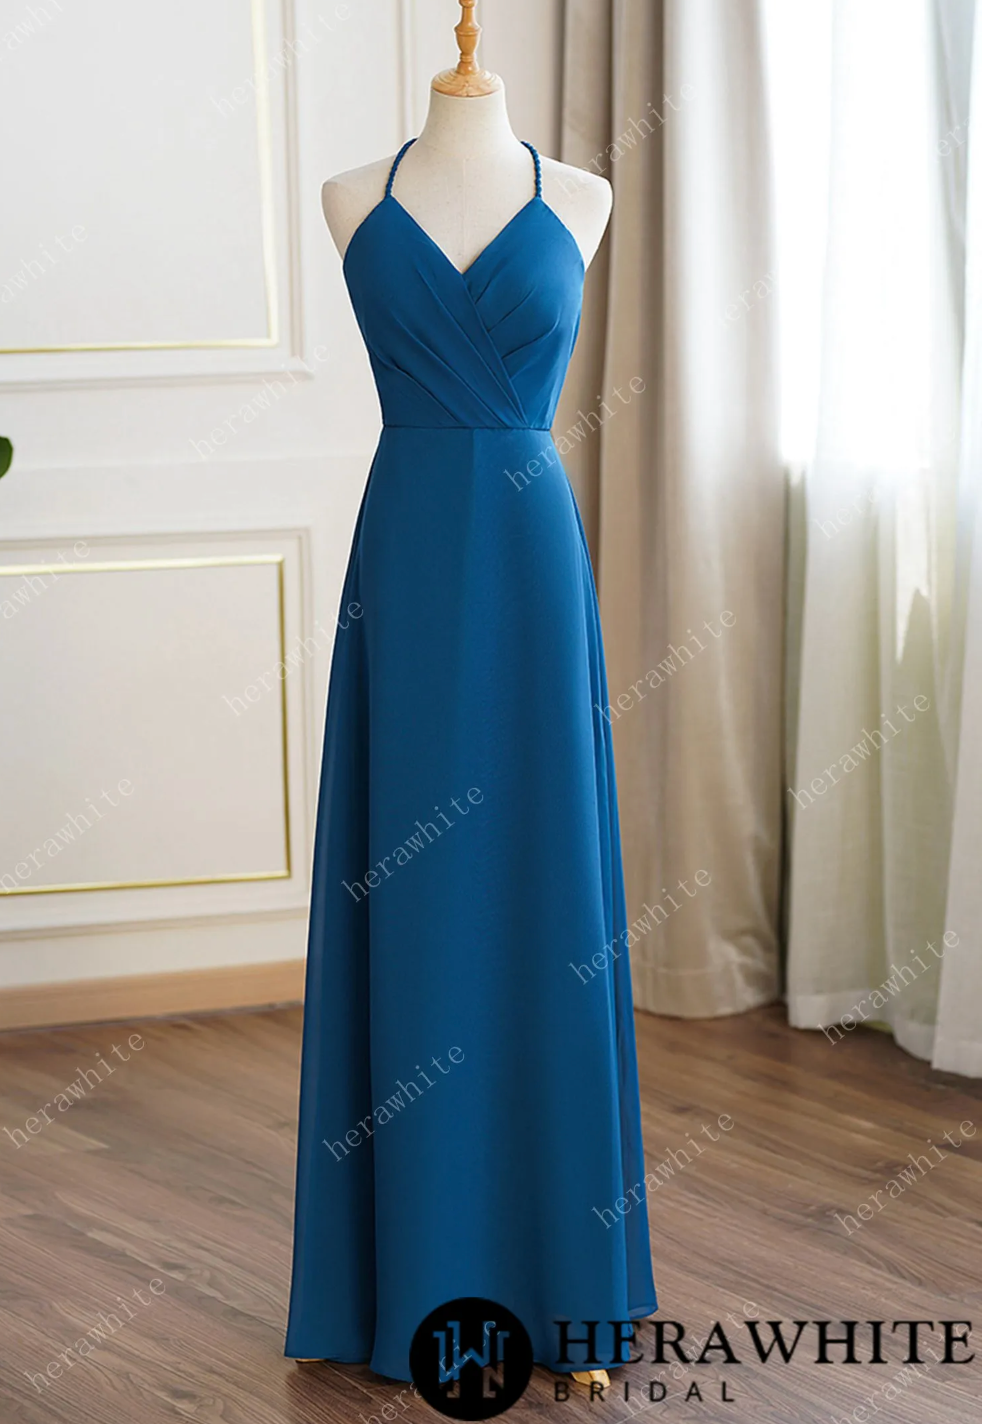 Rustic Blue Bridesmaid Dress Maxi Spring Summer Backless Halter Dress –  TulleLux Bridal Crowns & Accessories